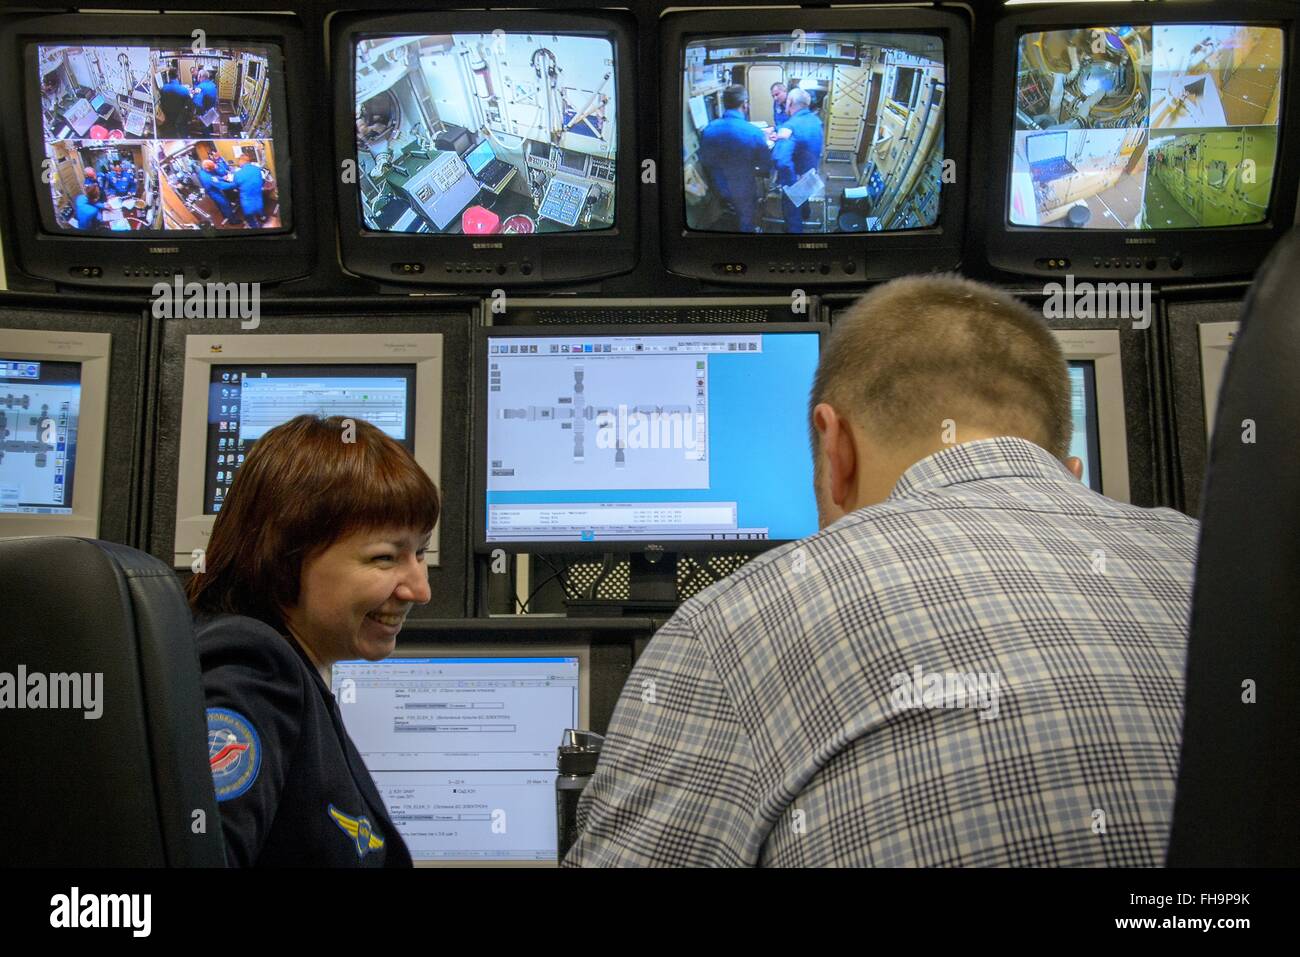 Star City, Russia. 24th February, 2016. International Space Station Expedition 47 prime crew members Jeff Williams, Russian cosmonaut Oleg Skripochka, and Russian cosmonaut Alexei Ovchinin are seen on the control room monitors during Soyuz qualification exams at the Gagarin Cosmonaut Training Center February 24, 2016 in Star City, Russia. Stock Photo